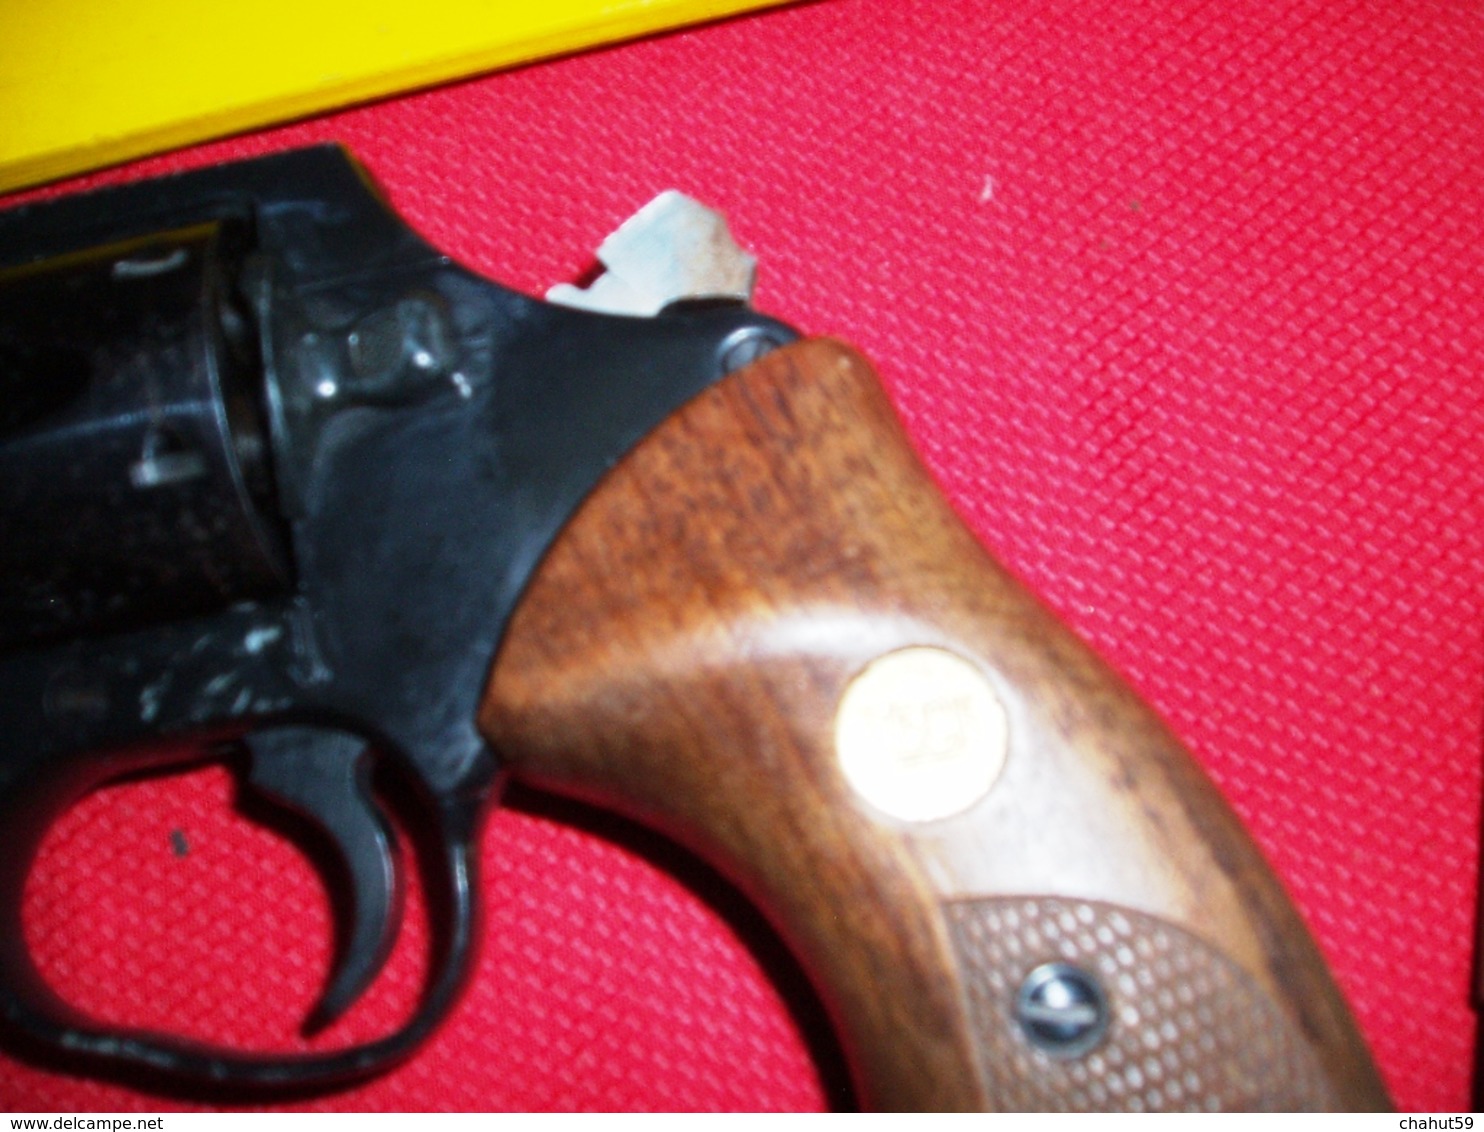 1 REVOLVER  D'ALARME ou de STARTER .Fabriquant:" RECK cal 9mm Flob.l".made in W.Germany.italy.